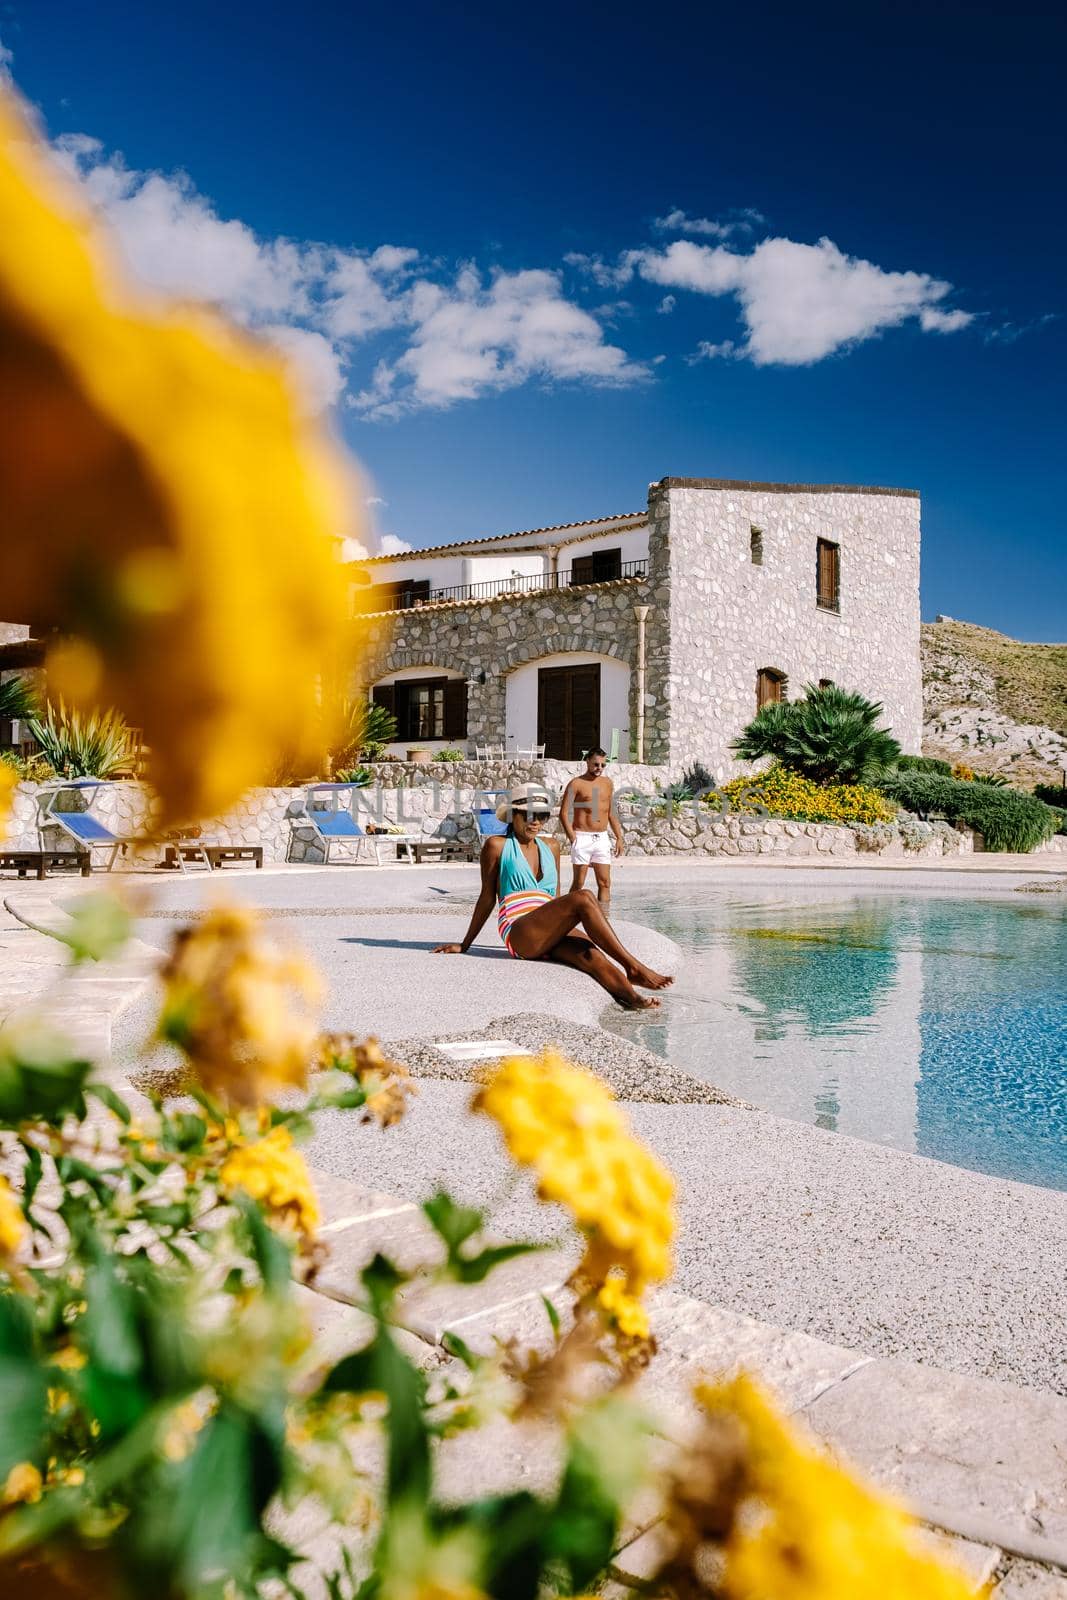 Agriturismo bed and breakfast at Sicily Italy, beautiful historical old farm renovated as BB Sicilia, a couple on vacation at Sicilian luxury agriturismo